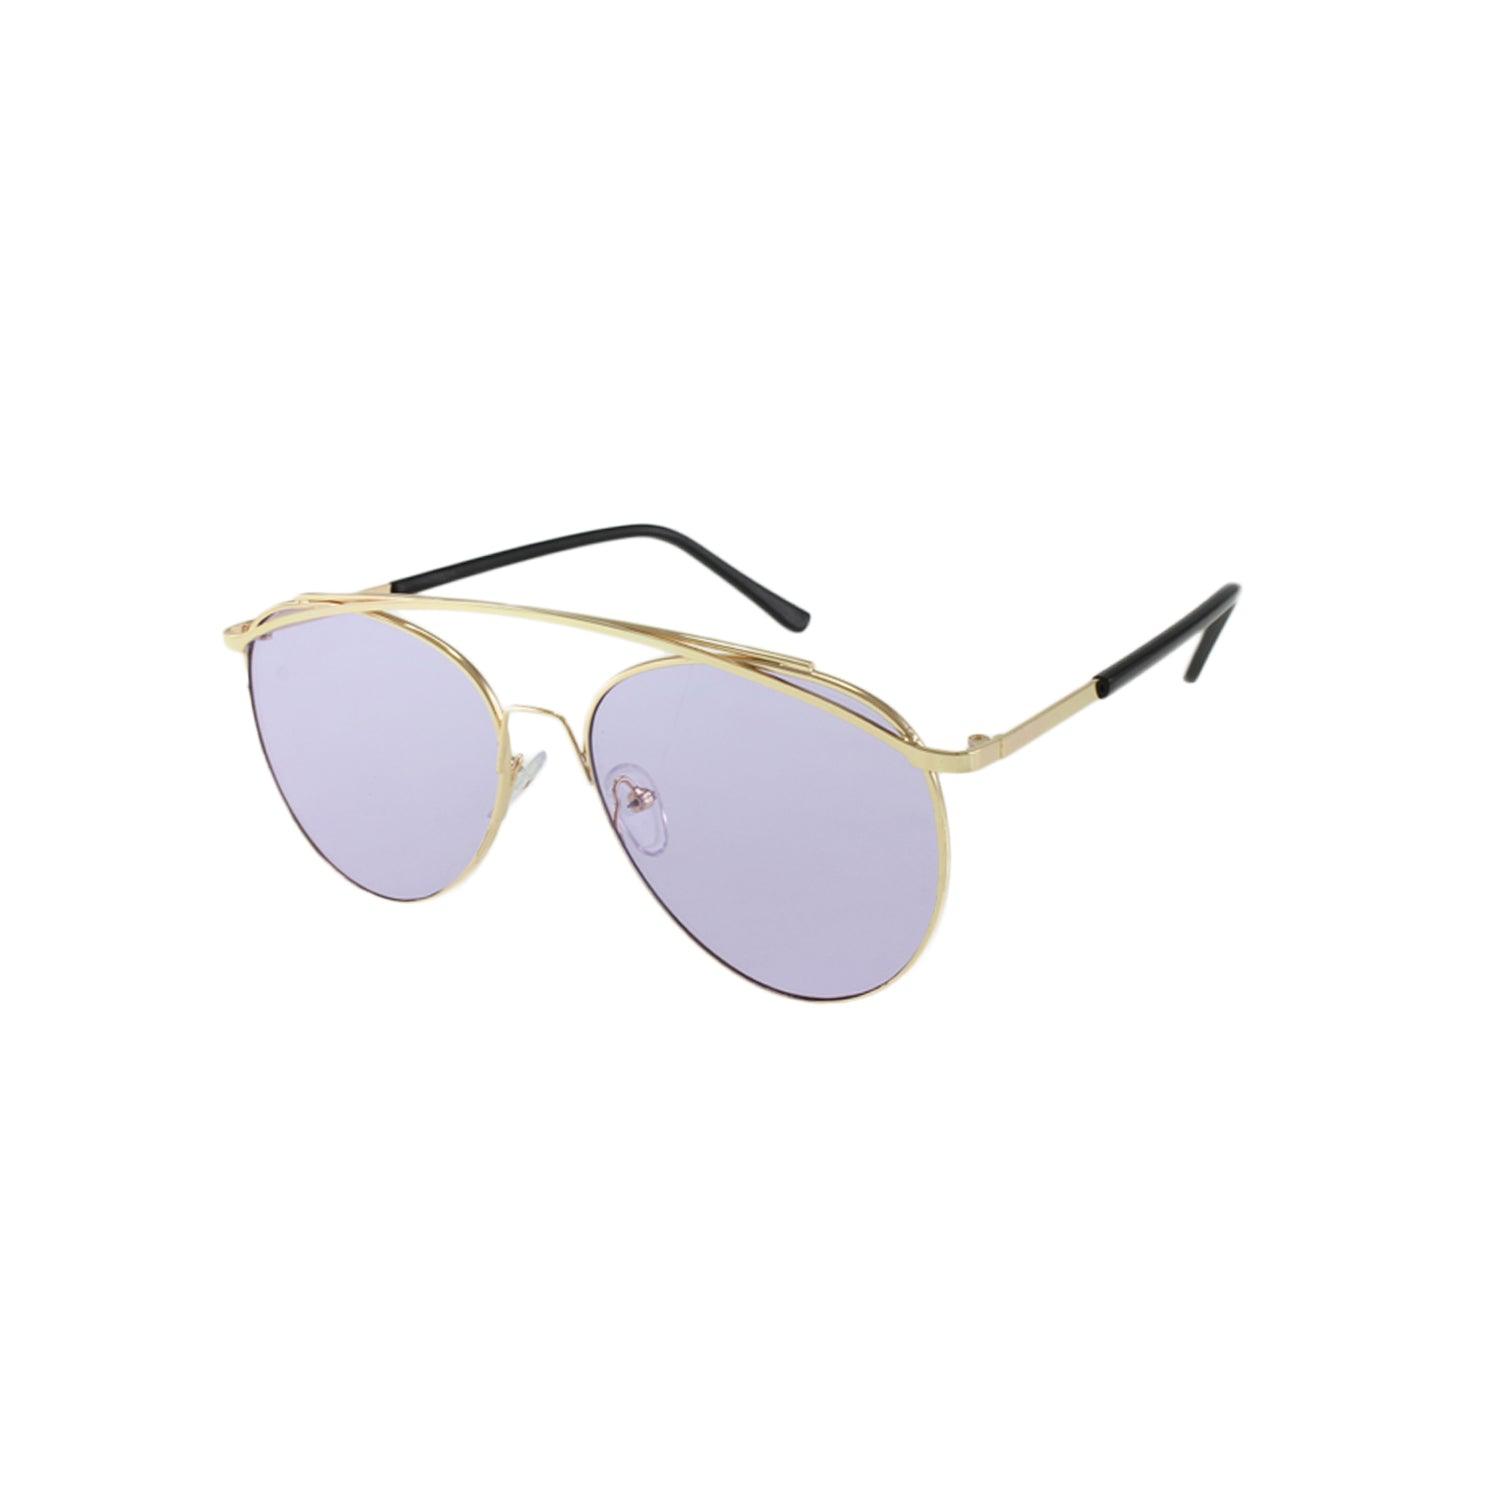 Jase New York Lincoln Sunglasses in Purple - Lacatang Market